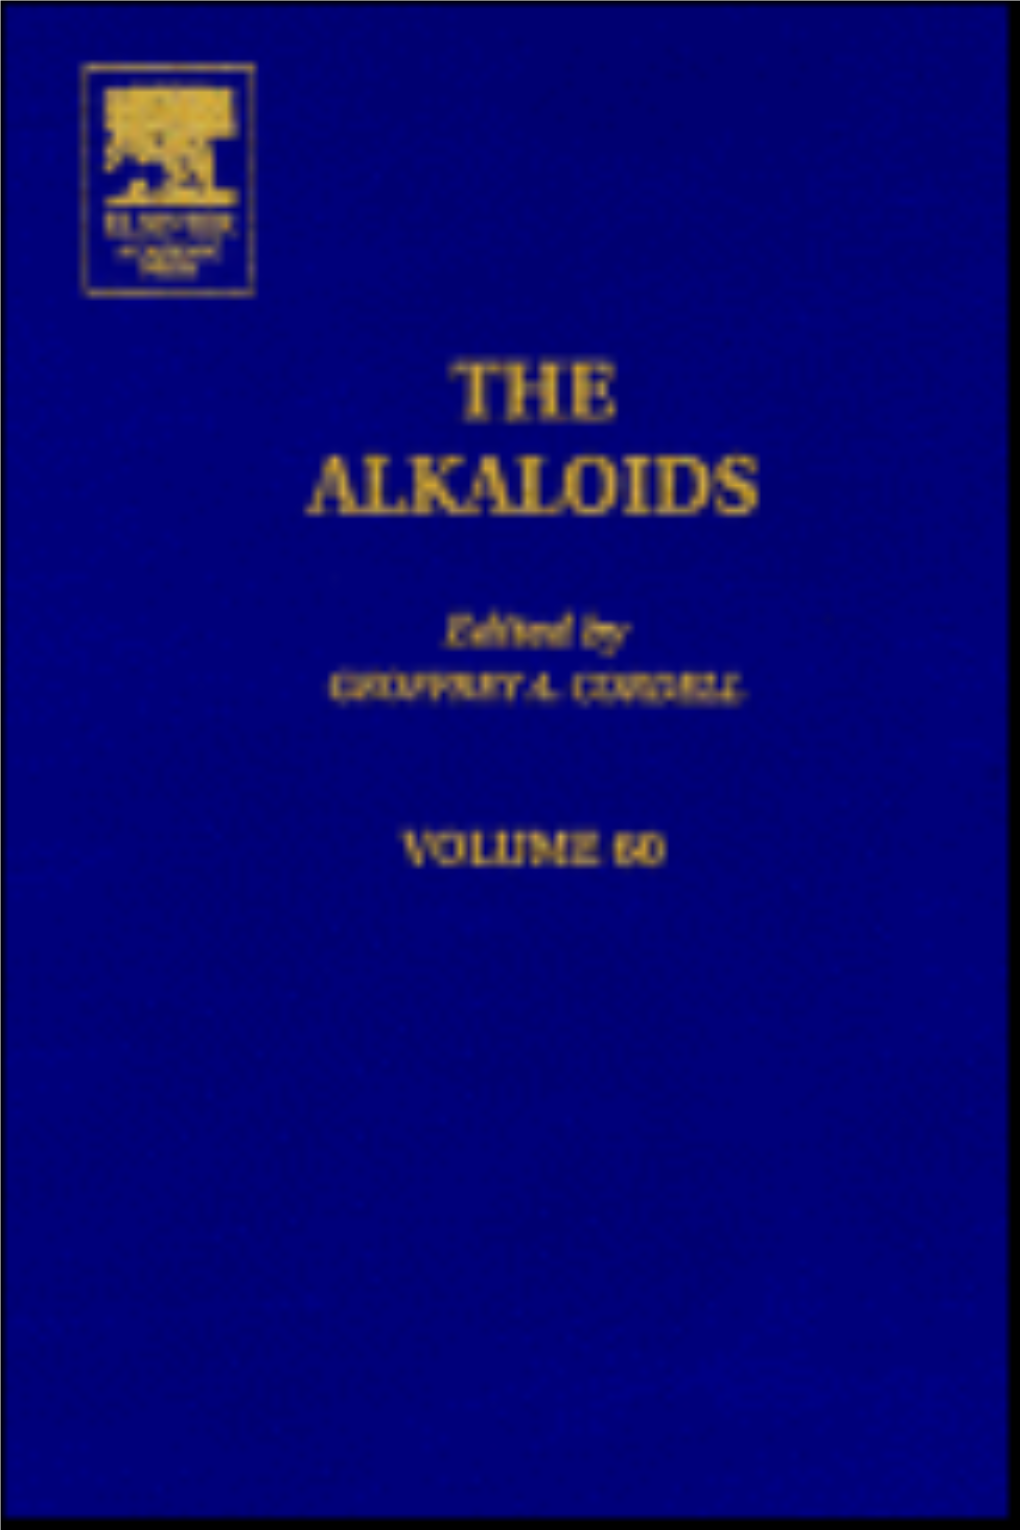 The Alkaloids: Chemistry and Biology